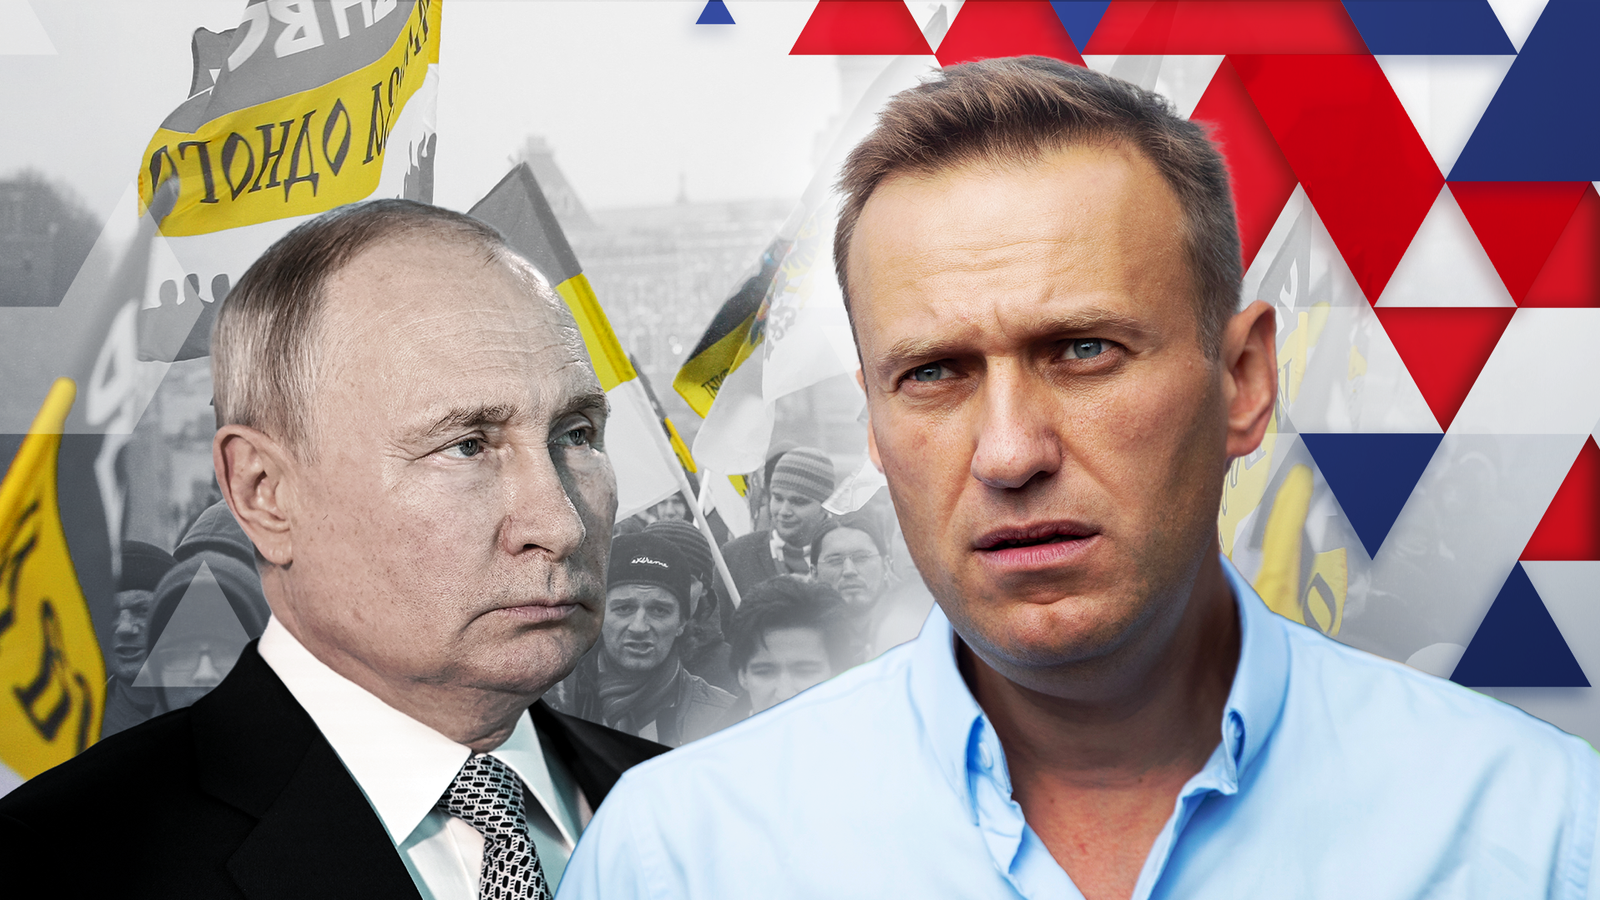 Alexei Navalny: Who is the jailed Putin critic some Russians hope could overthrow him?